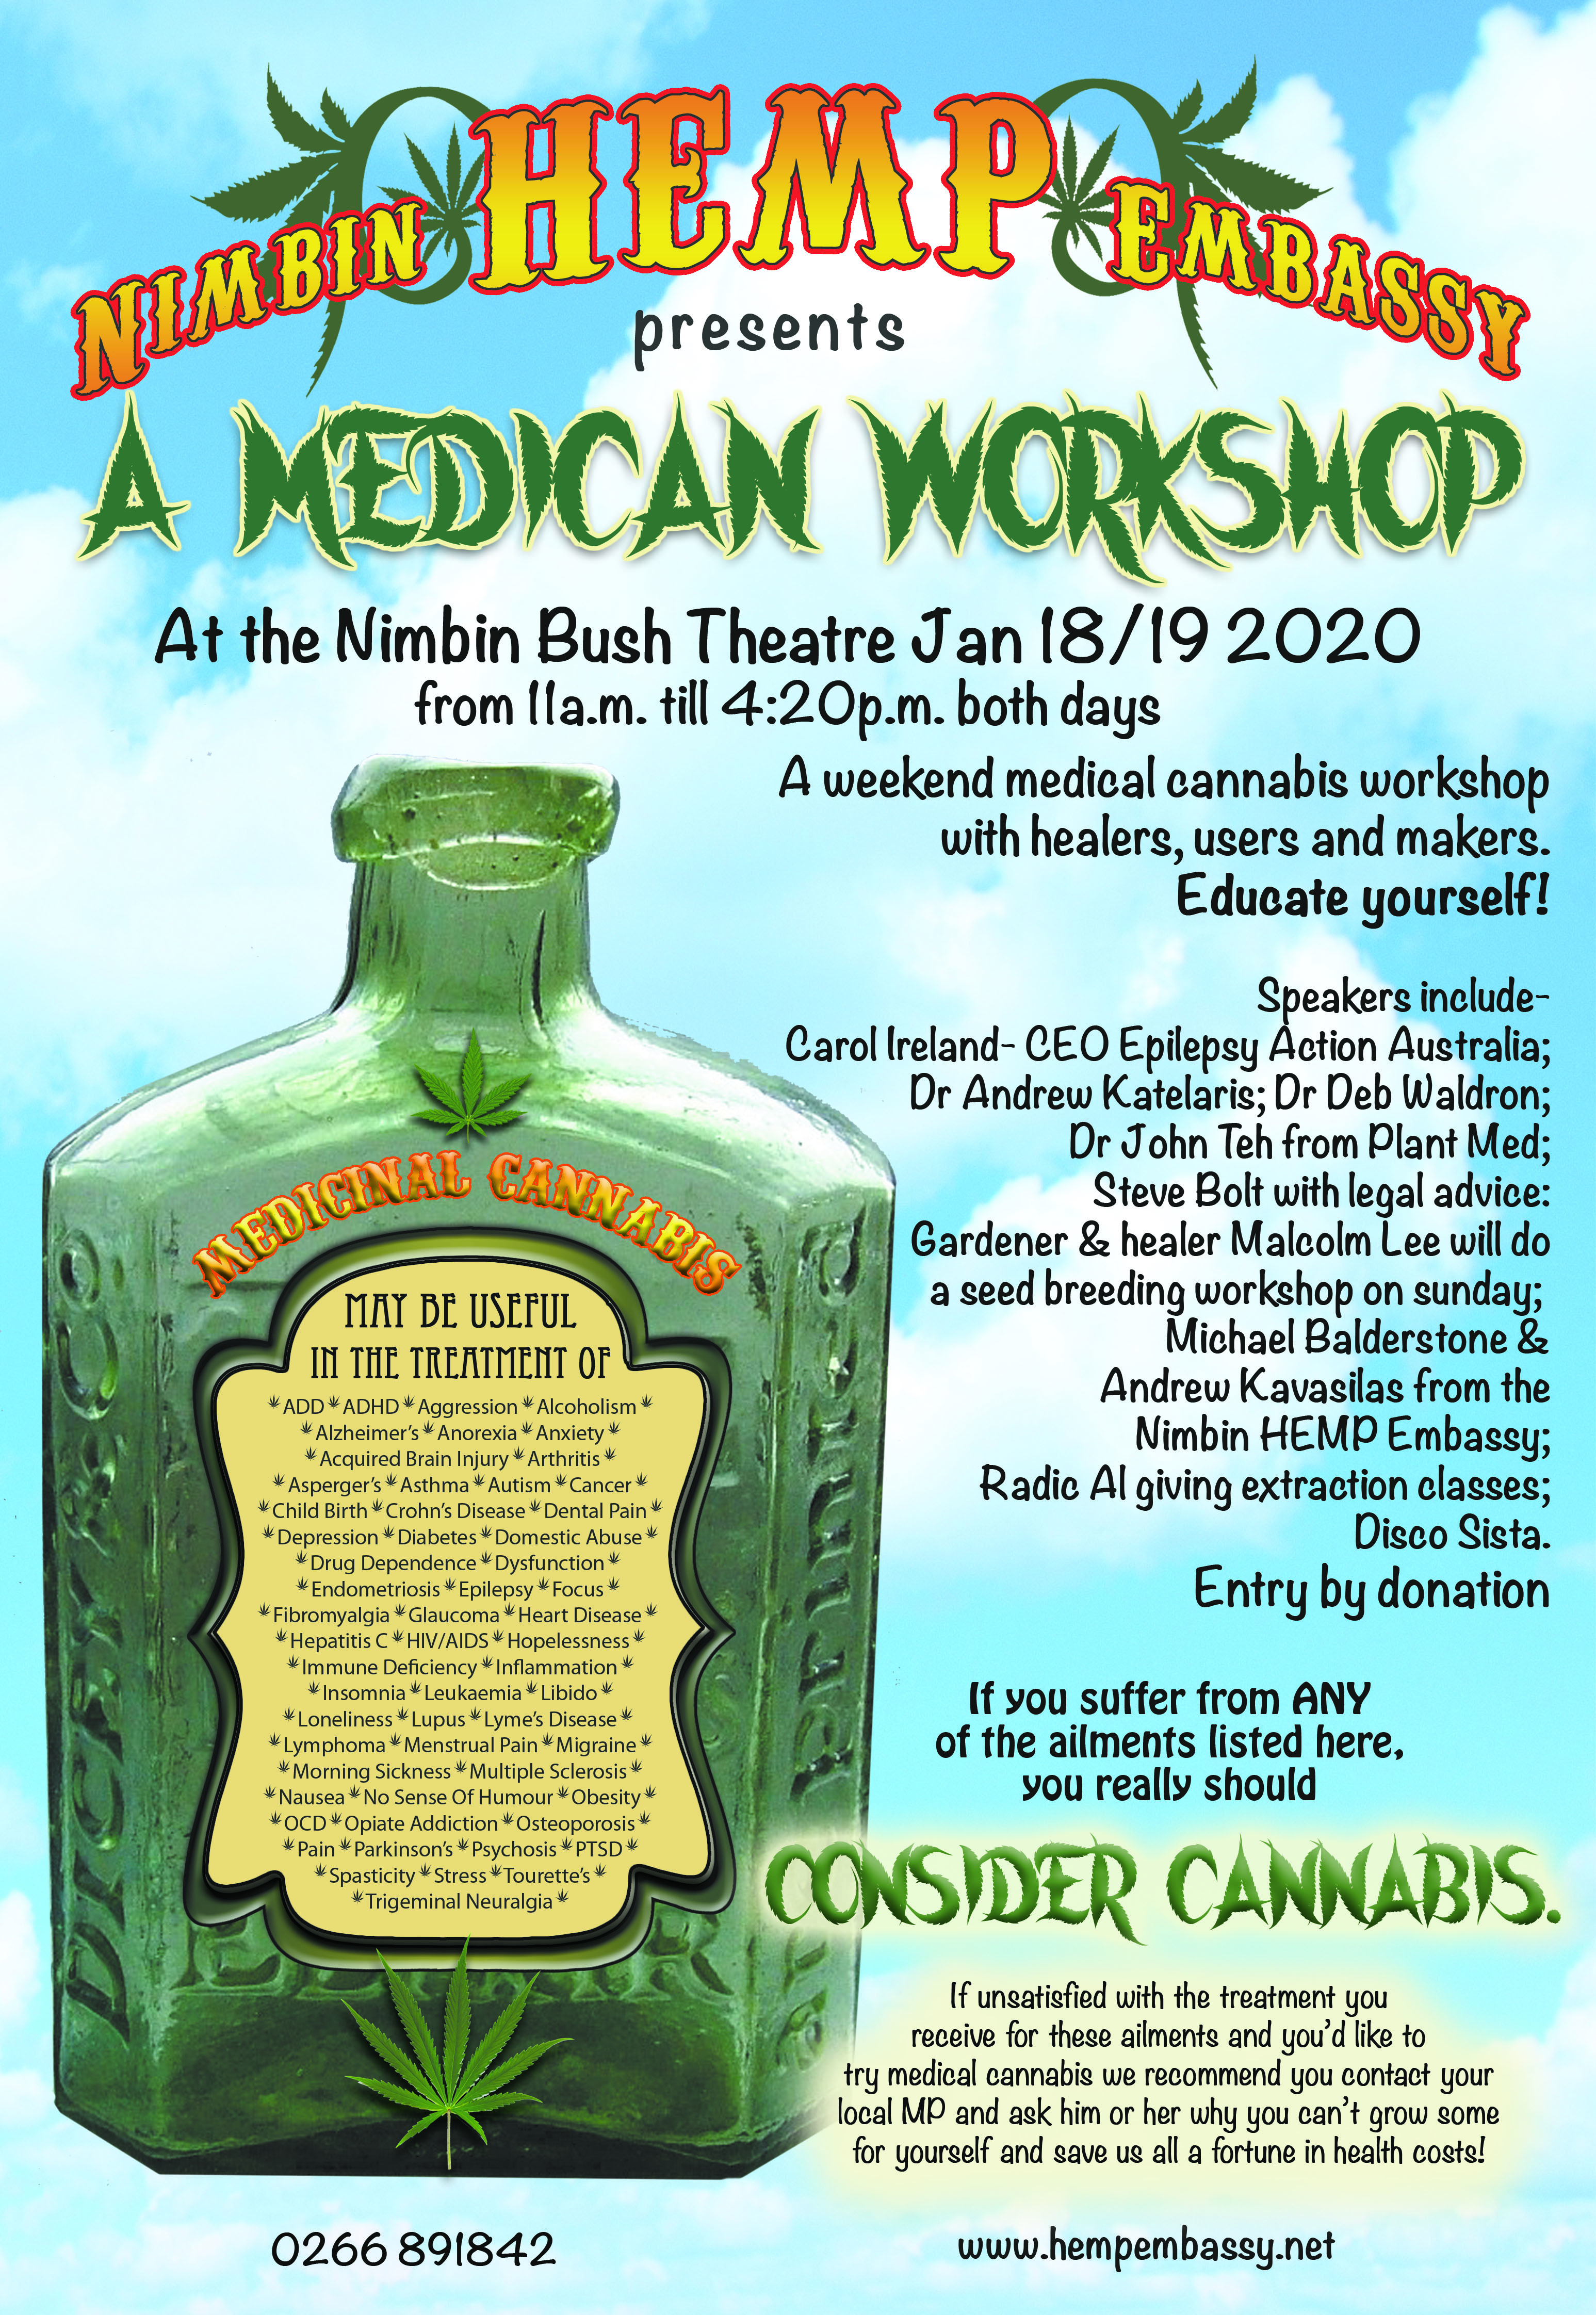 Medical Cannabis Workshop in Nimbin this coming weekend 18-19 January